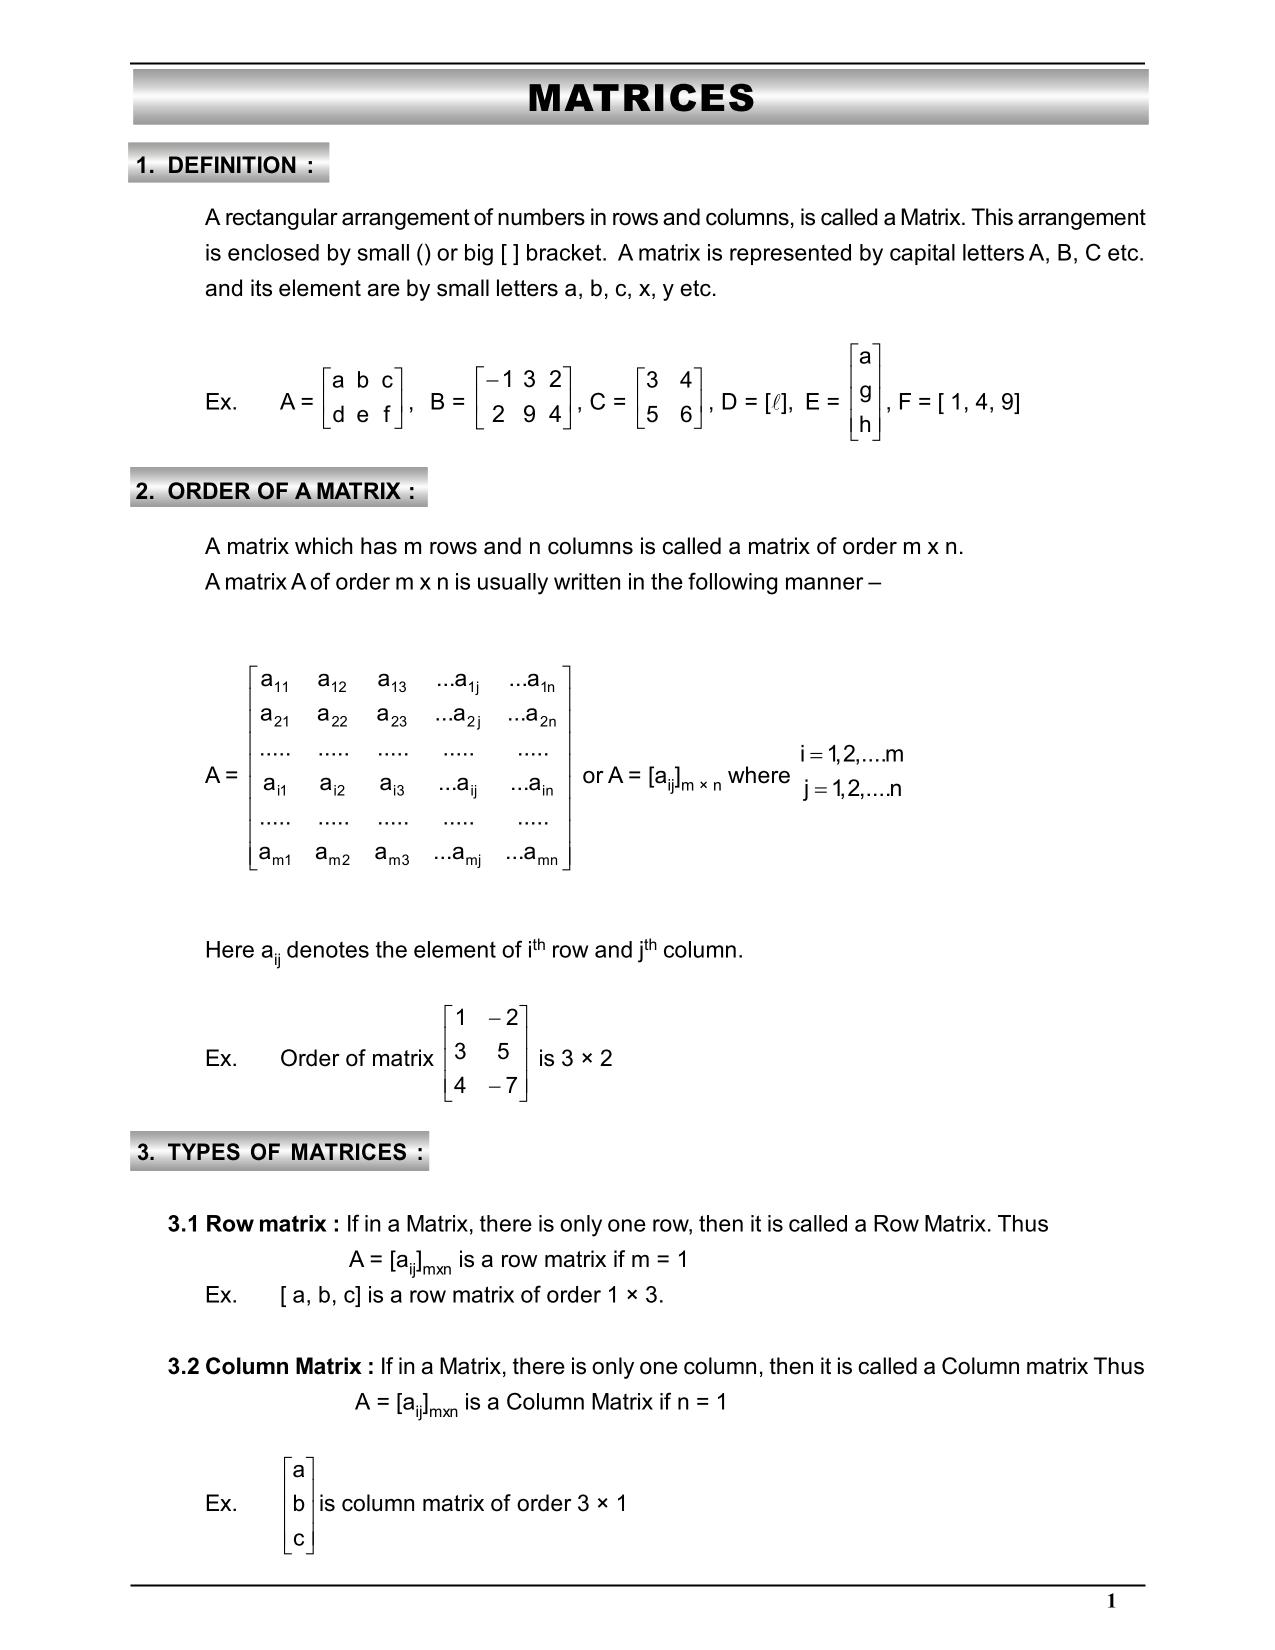 case study questions on matrices class 12